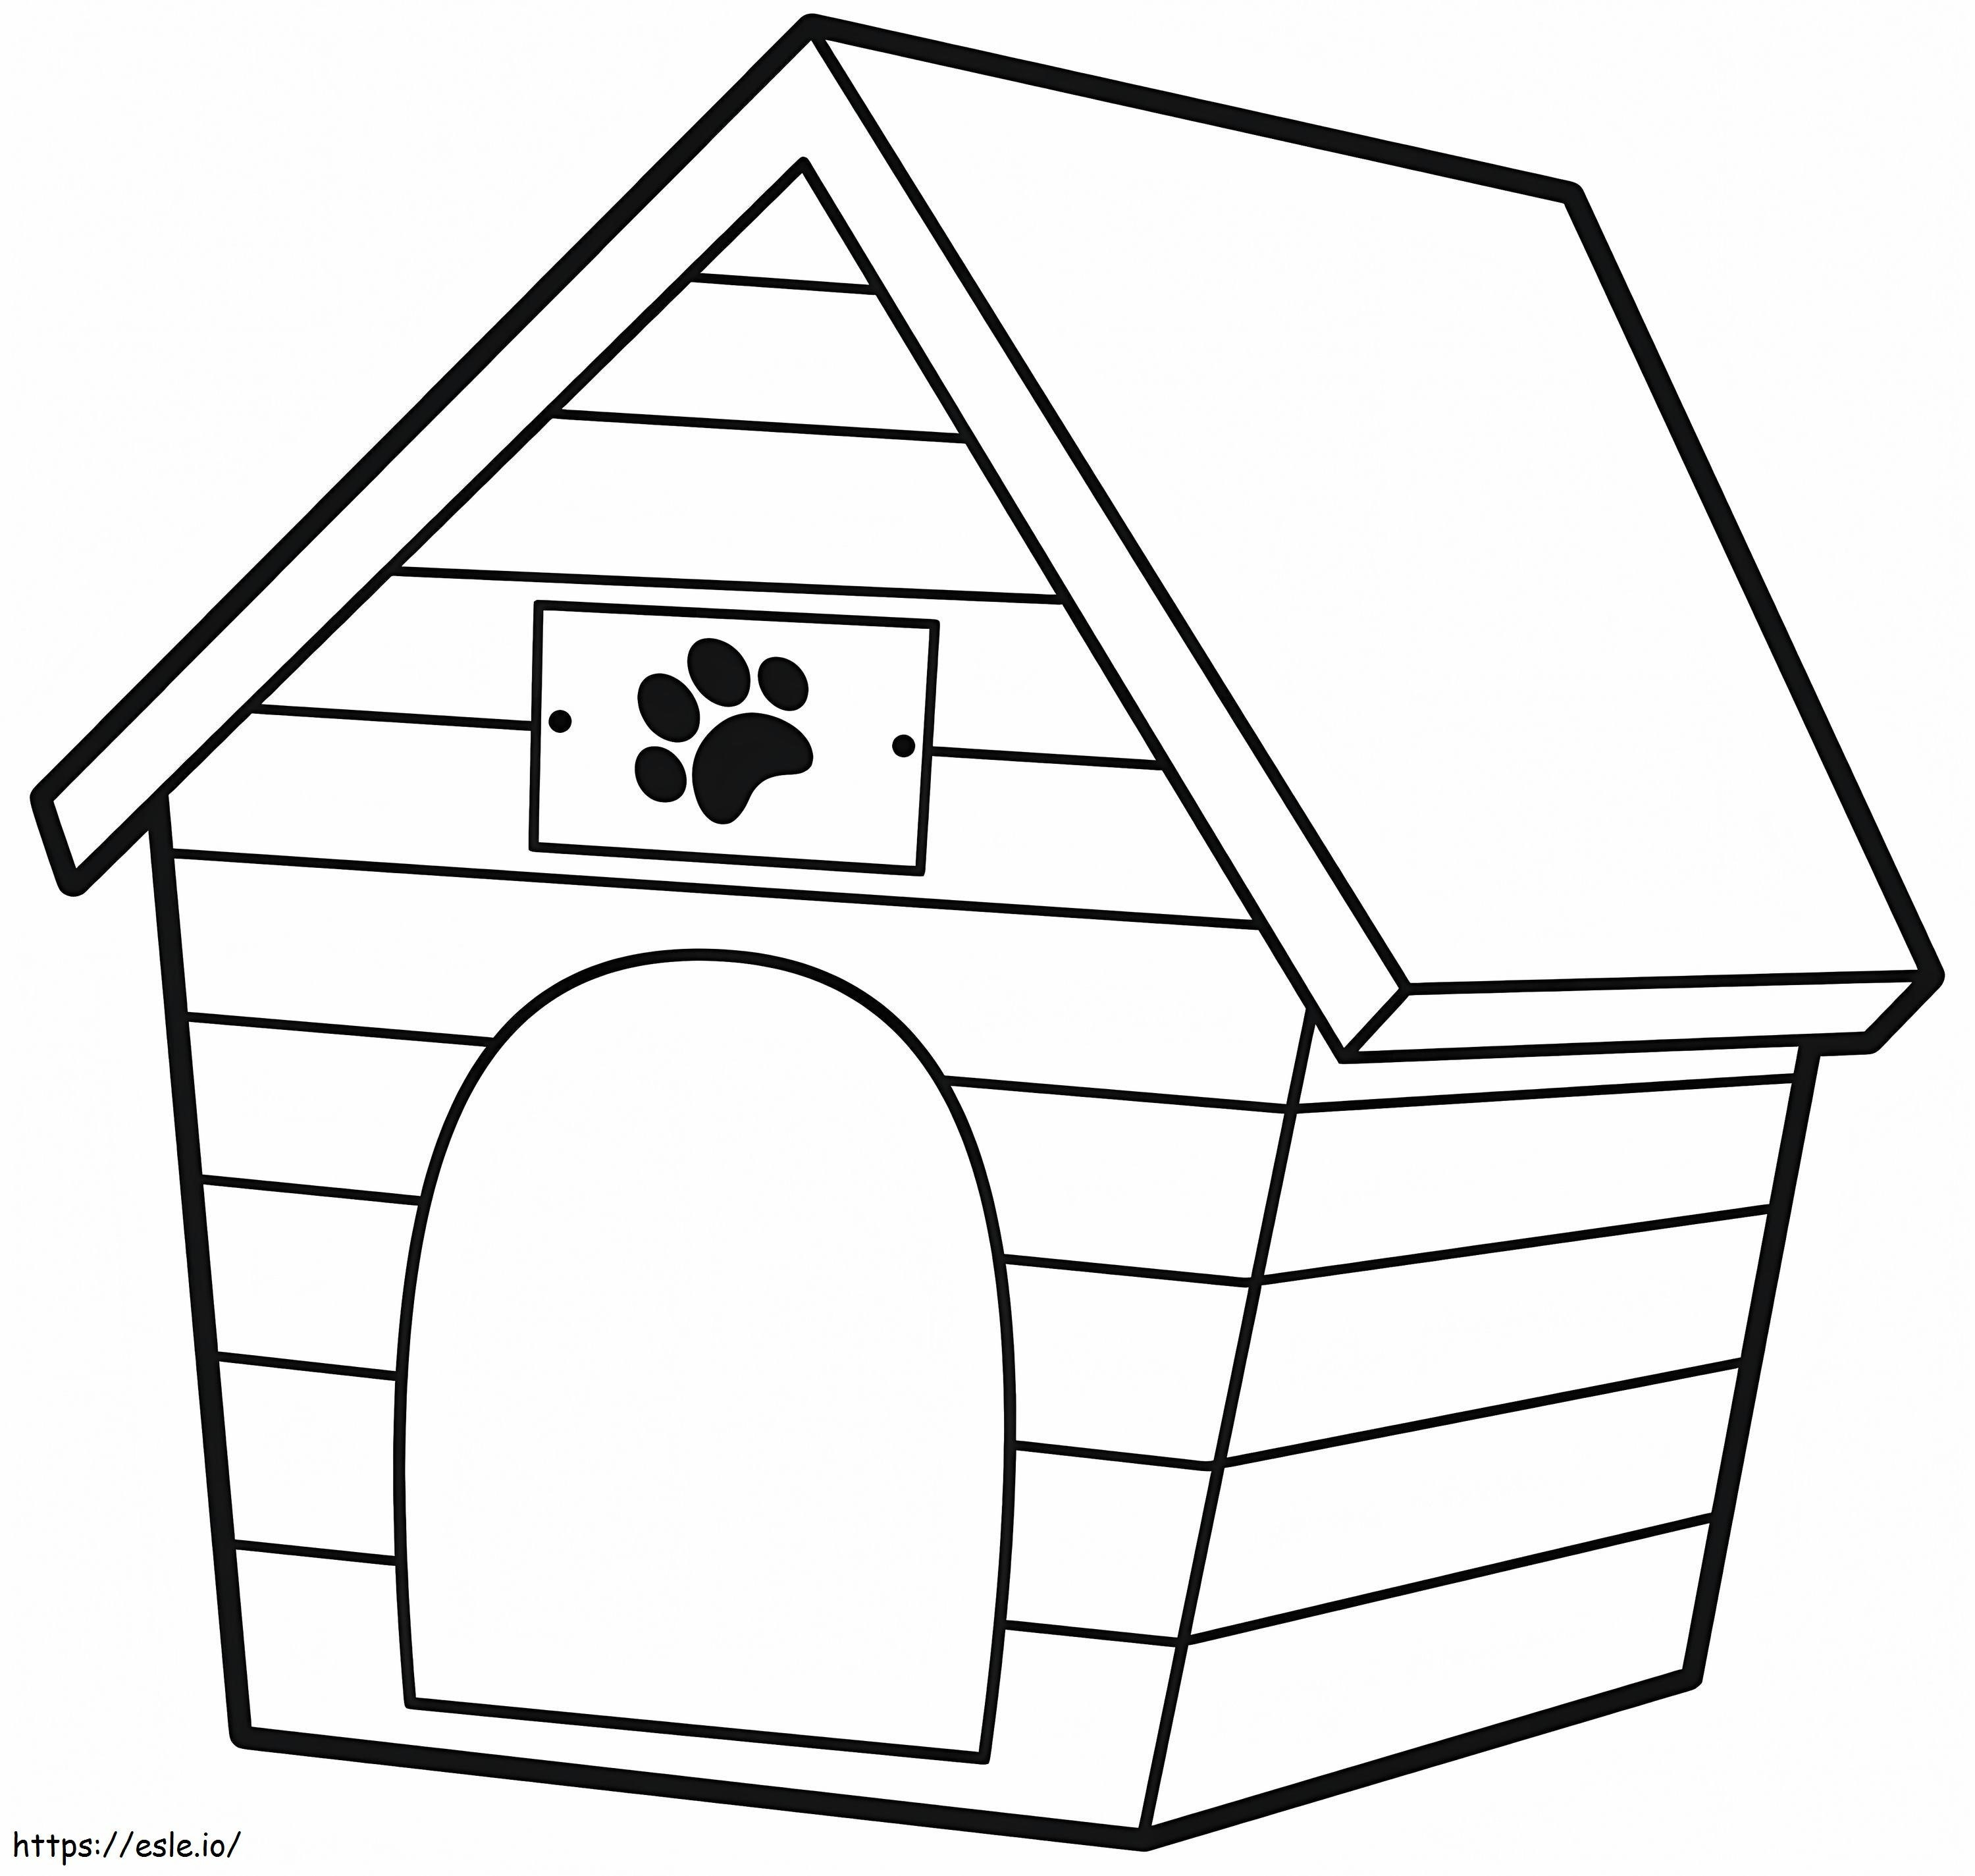 Nice Dog House coloring page